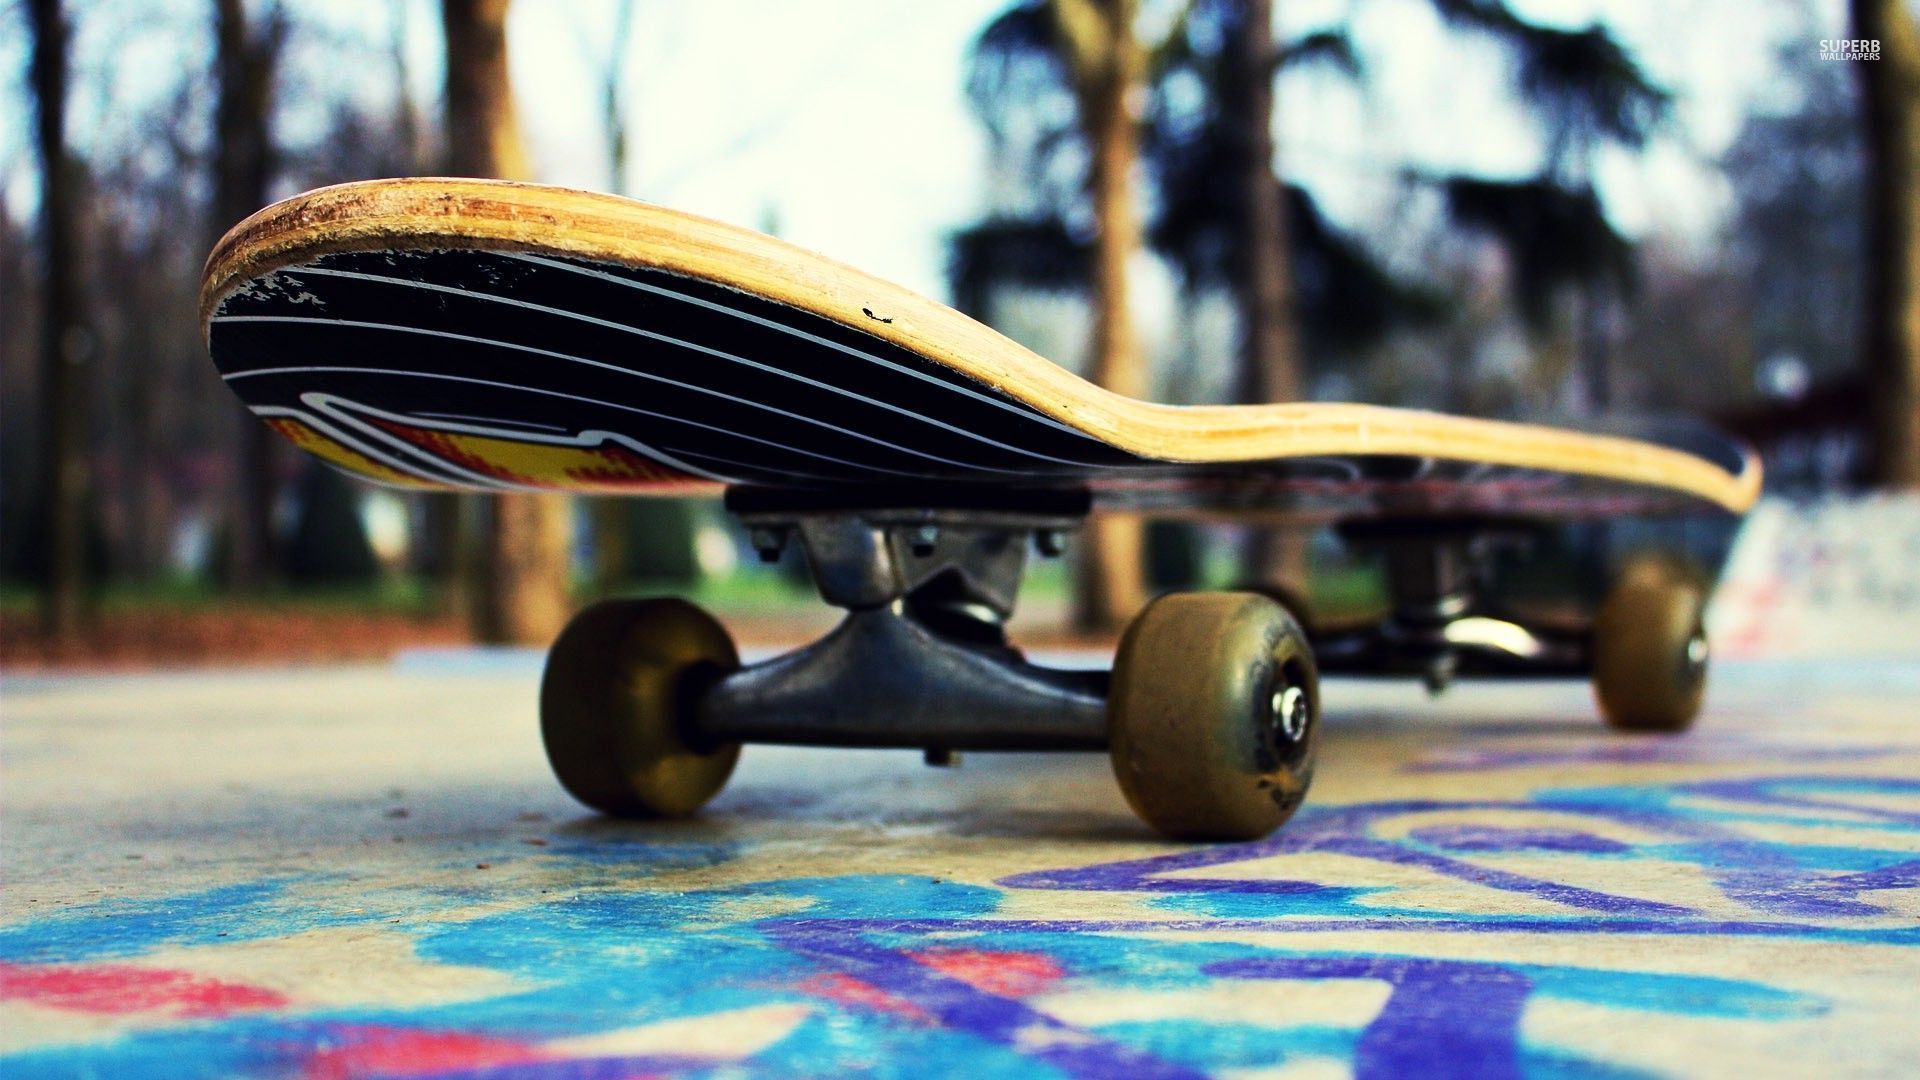 Hd Pictures Skateboard Px For Pc & Mac, Laptop, Tablet - Skateboard Backgrounds - HD Wallpaper 